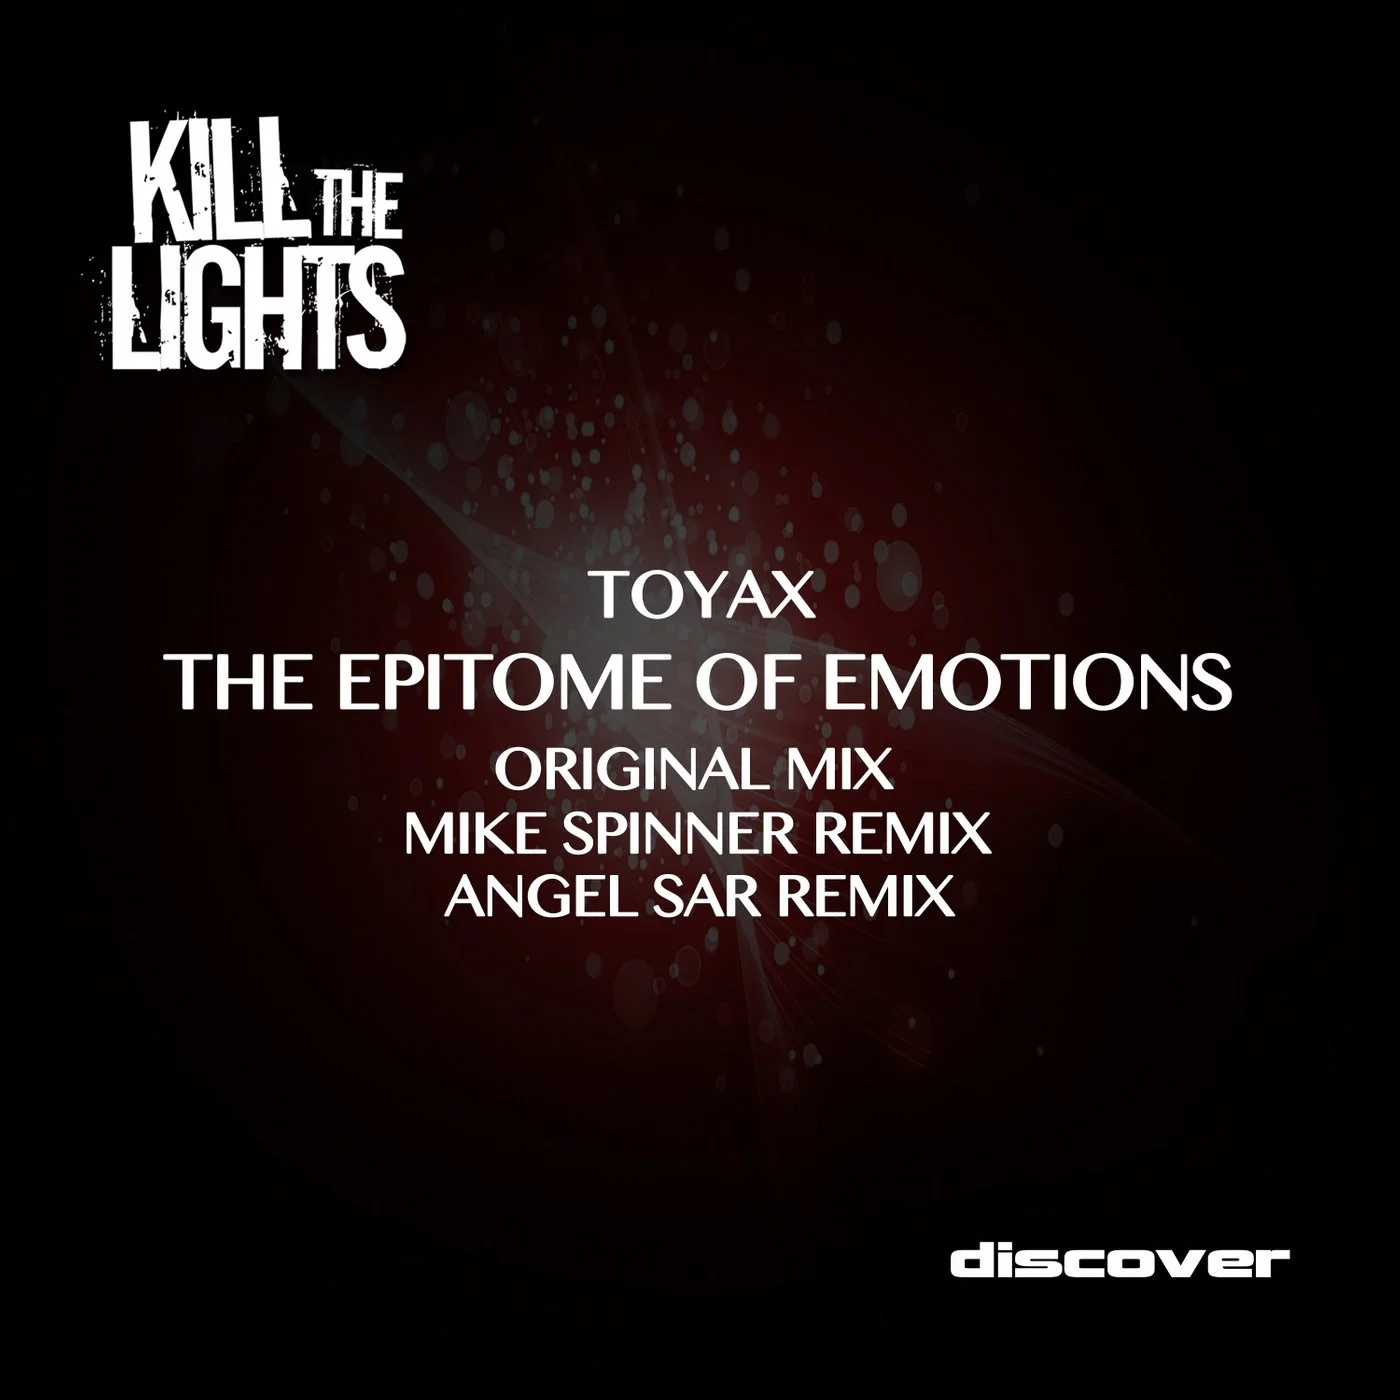 Toyax - The Epitome of Emotions